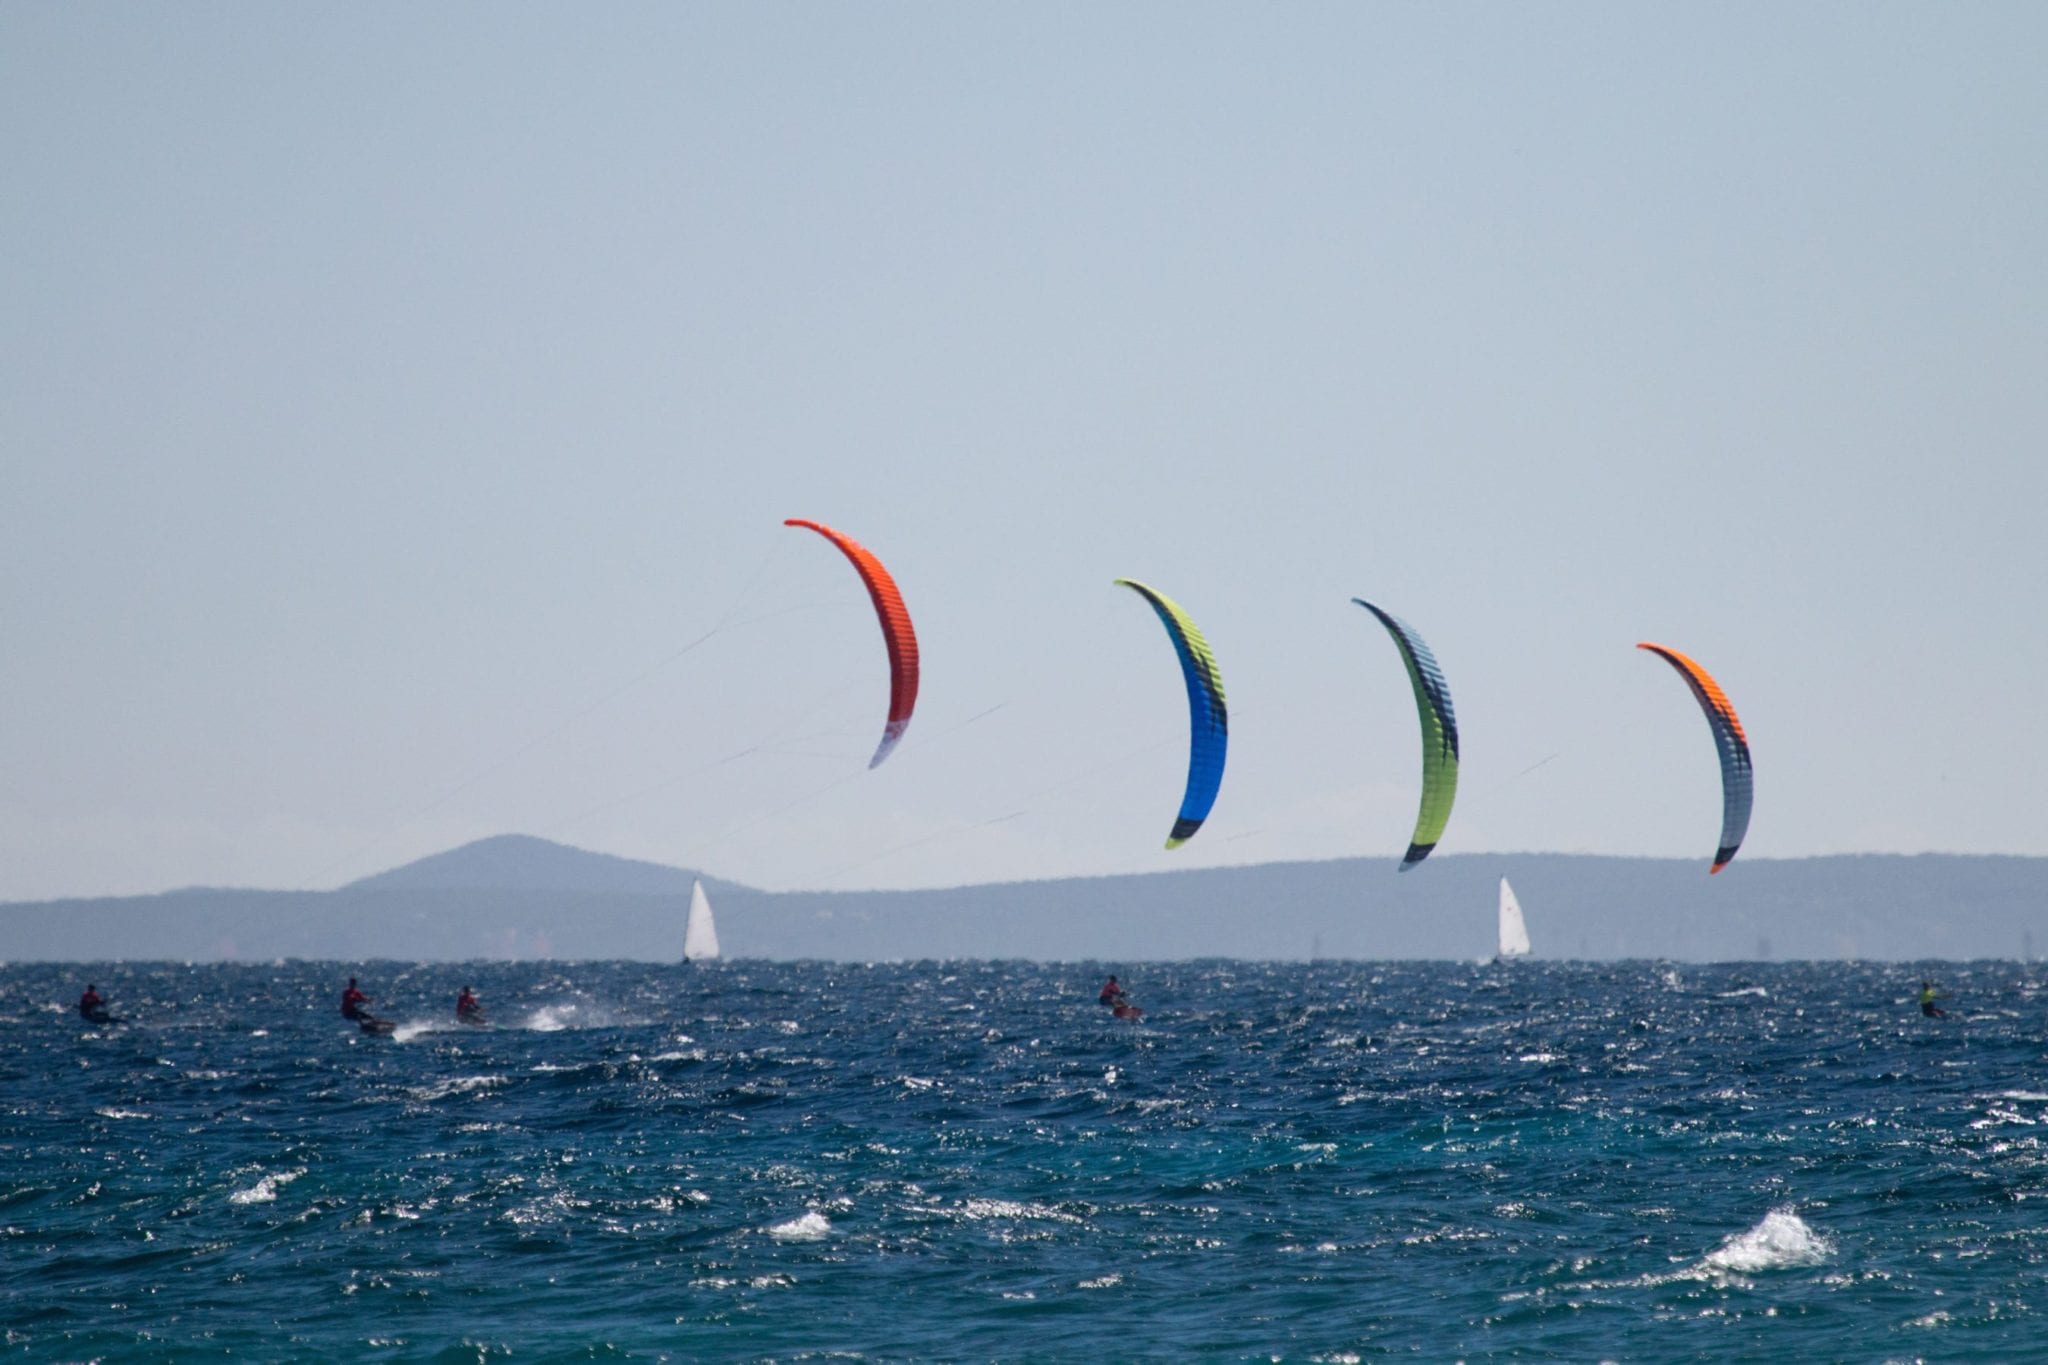 Racers on the upwind tack demonstrate that competitors naturally gravitate to the designs that deliver the best performance.